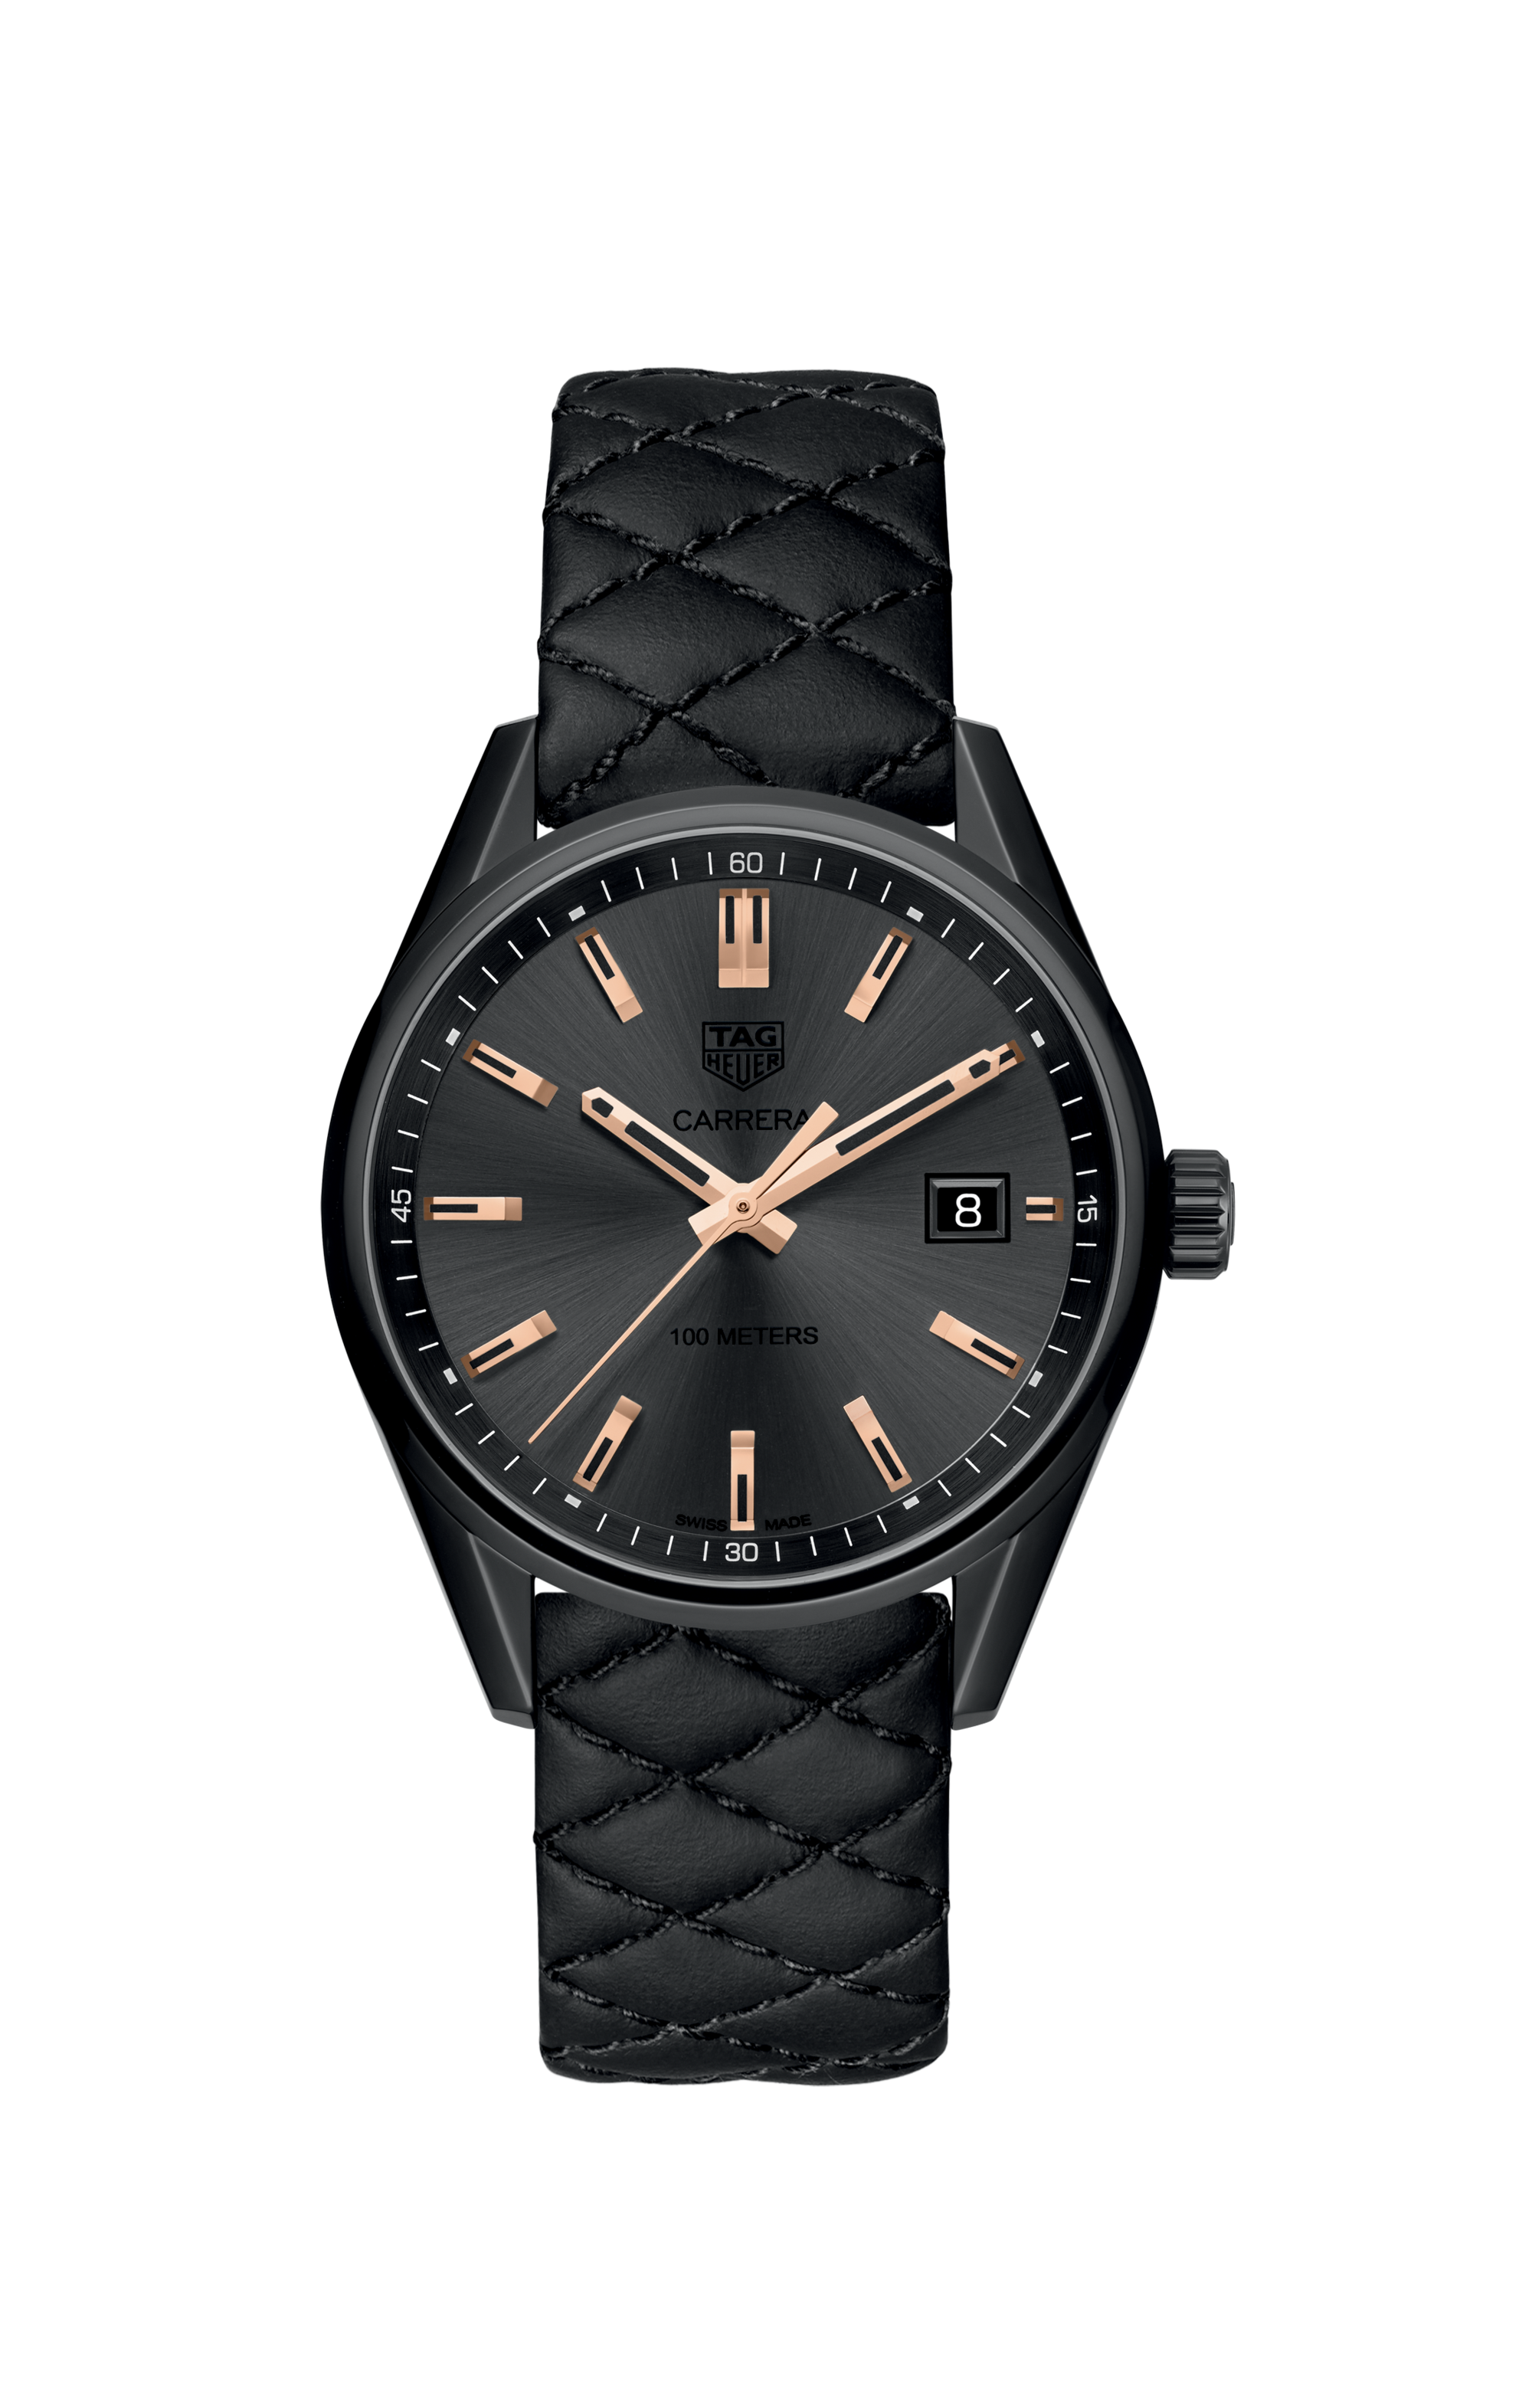 Black and Gold is a Racy Look – The New TAG Heuer Carrera